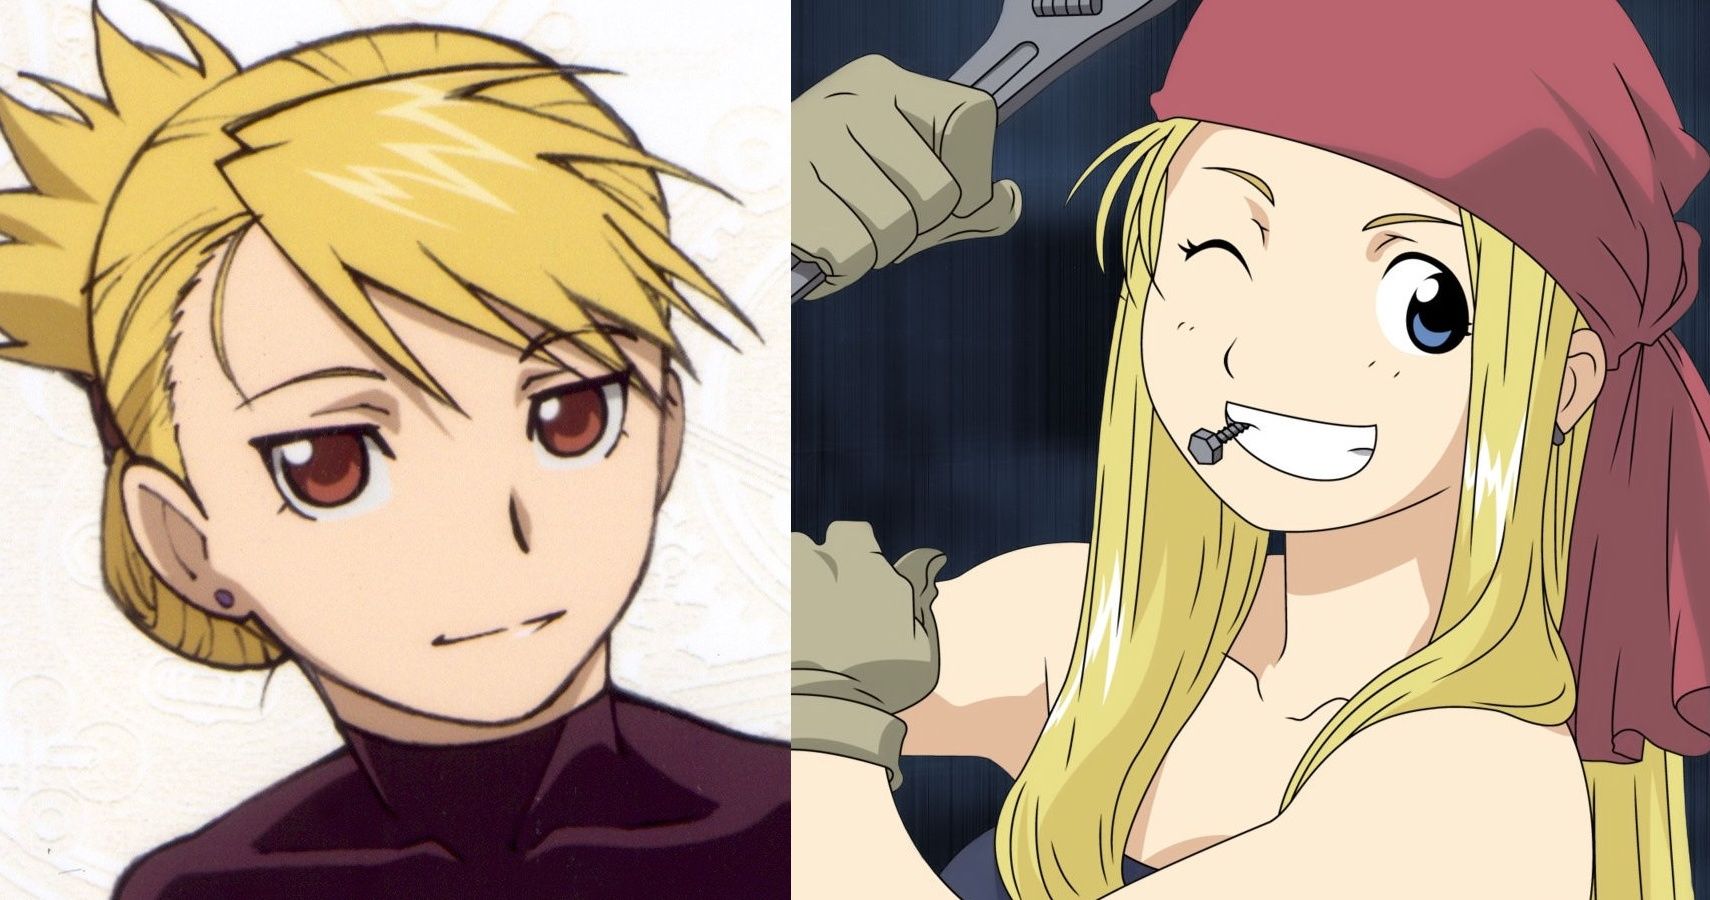 File:Anime Expo 2011 - Winry and Edward from Fullmetal Alchemist  (5893315256).jpg - Wikimedia Commons